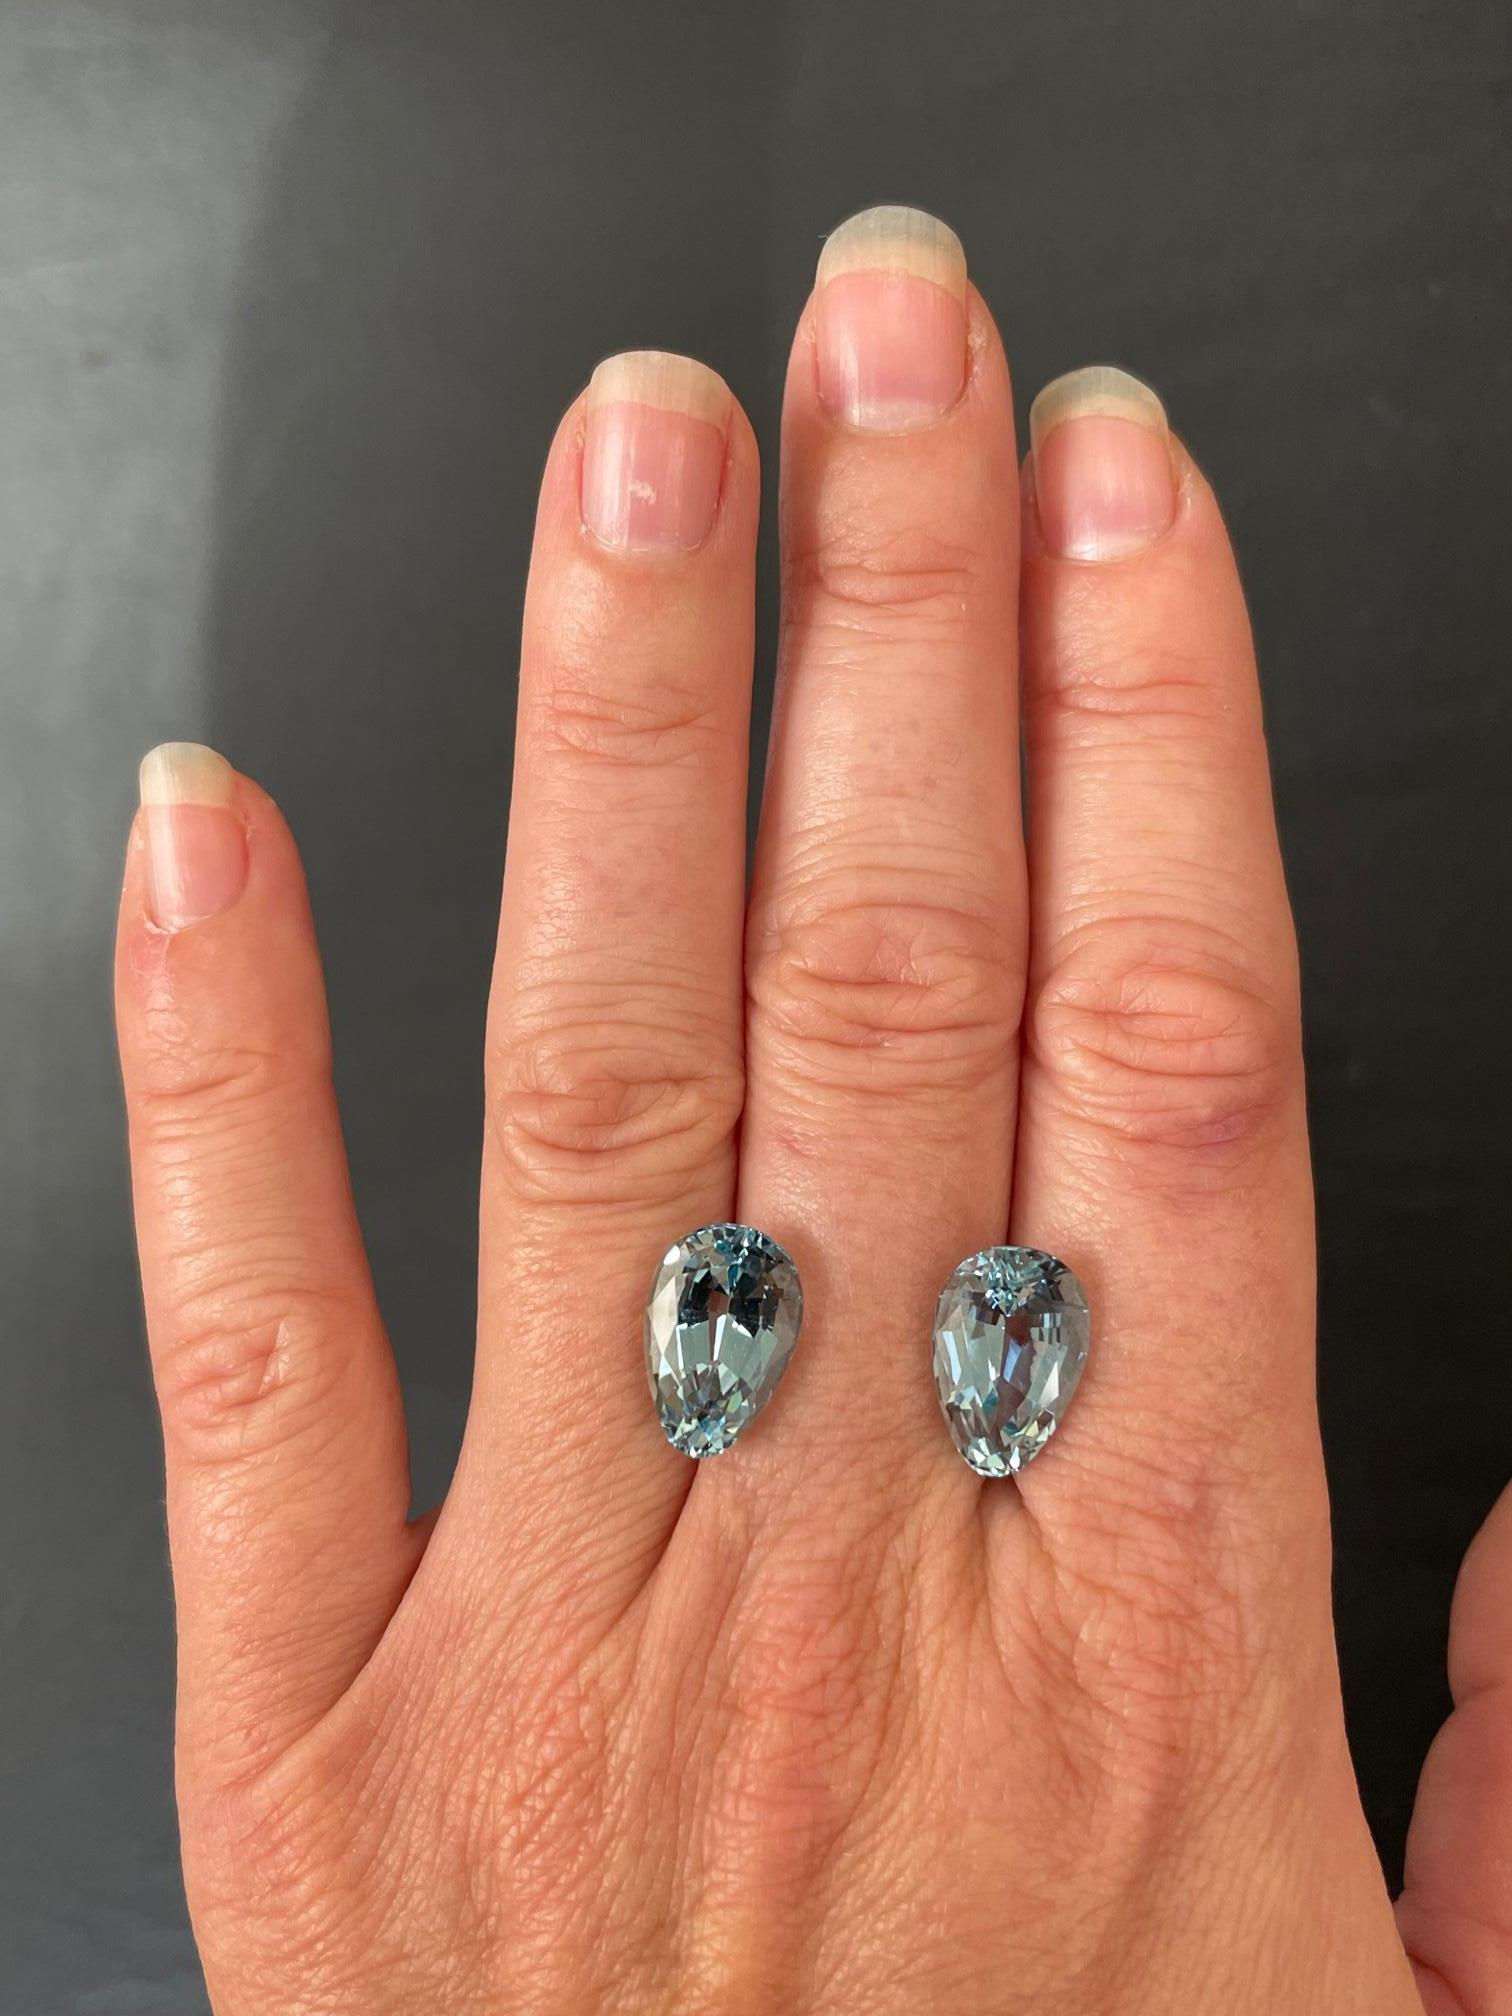 Exclusive pair of 10.87 carats total, 